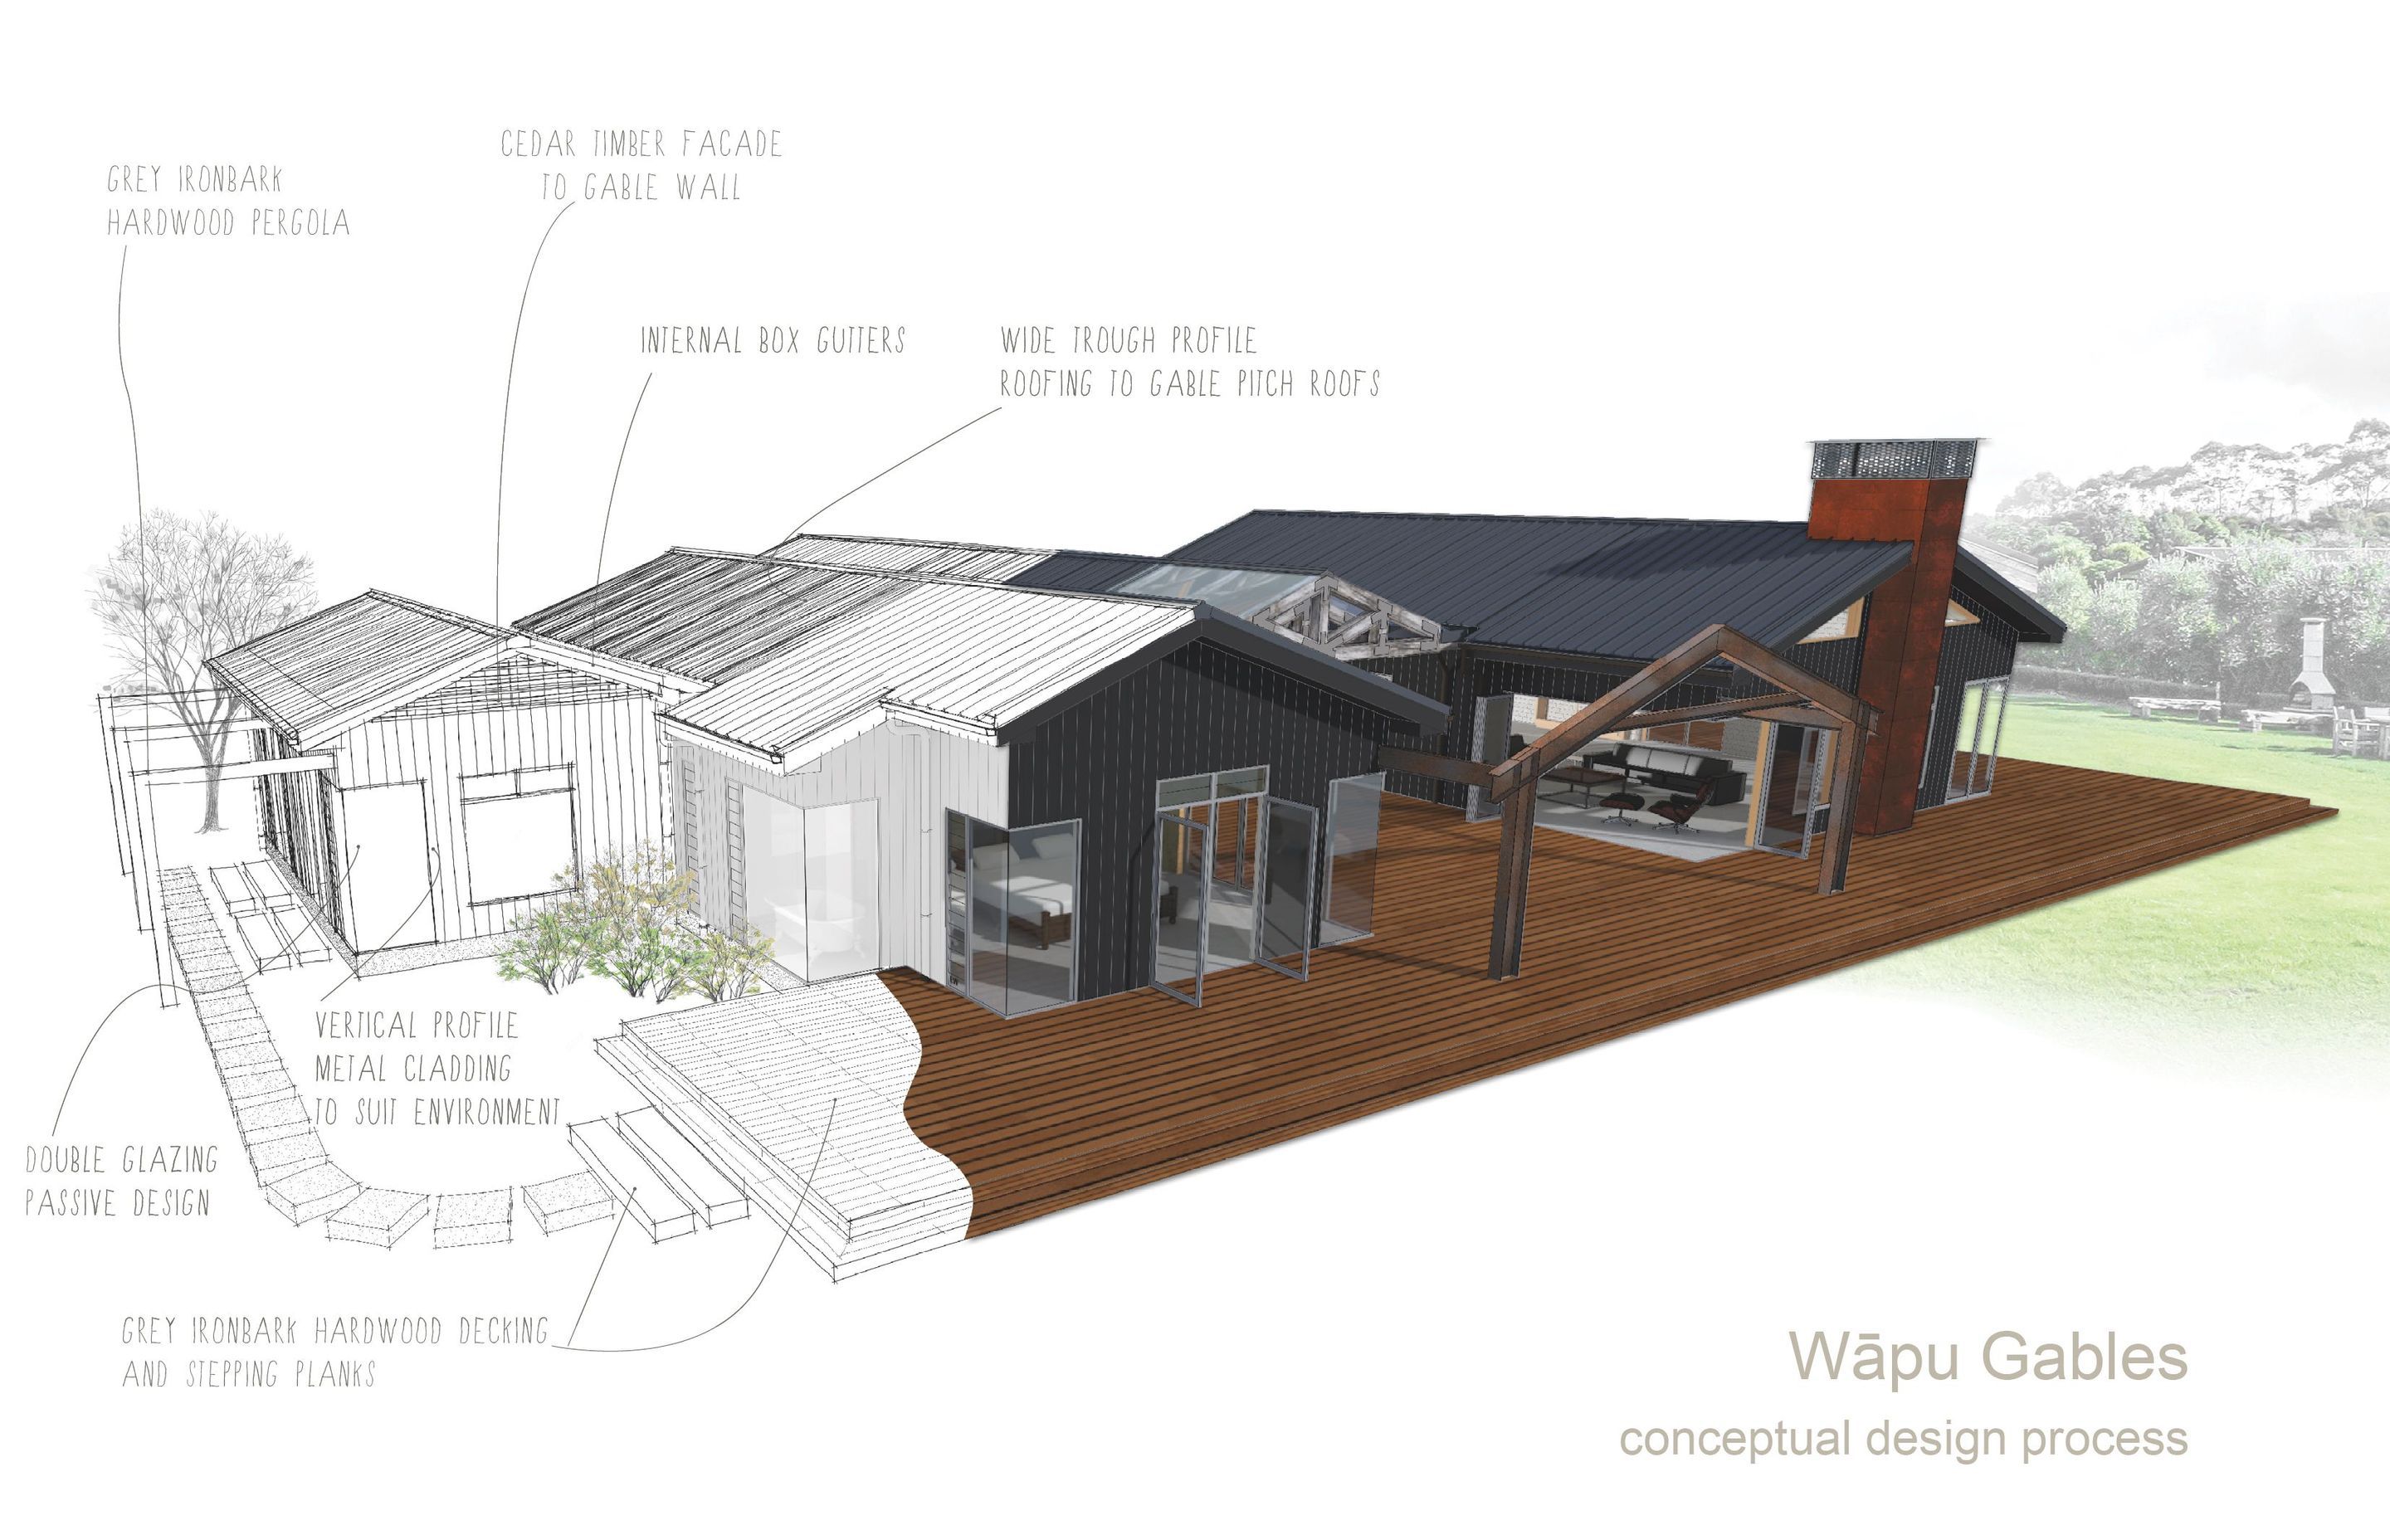 Conceptual design process render by Dream Planning.